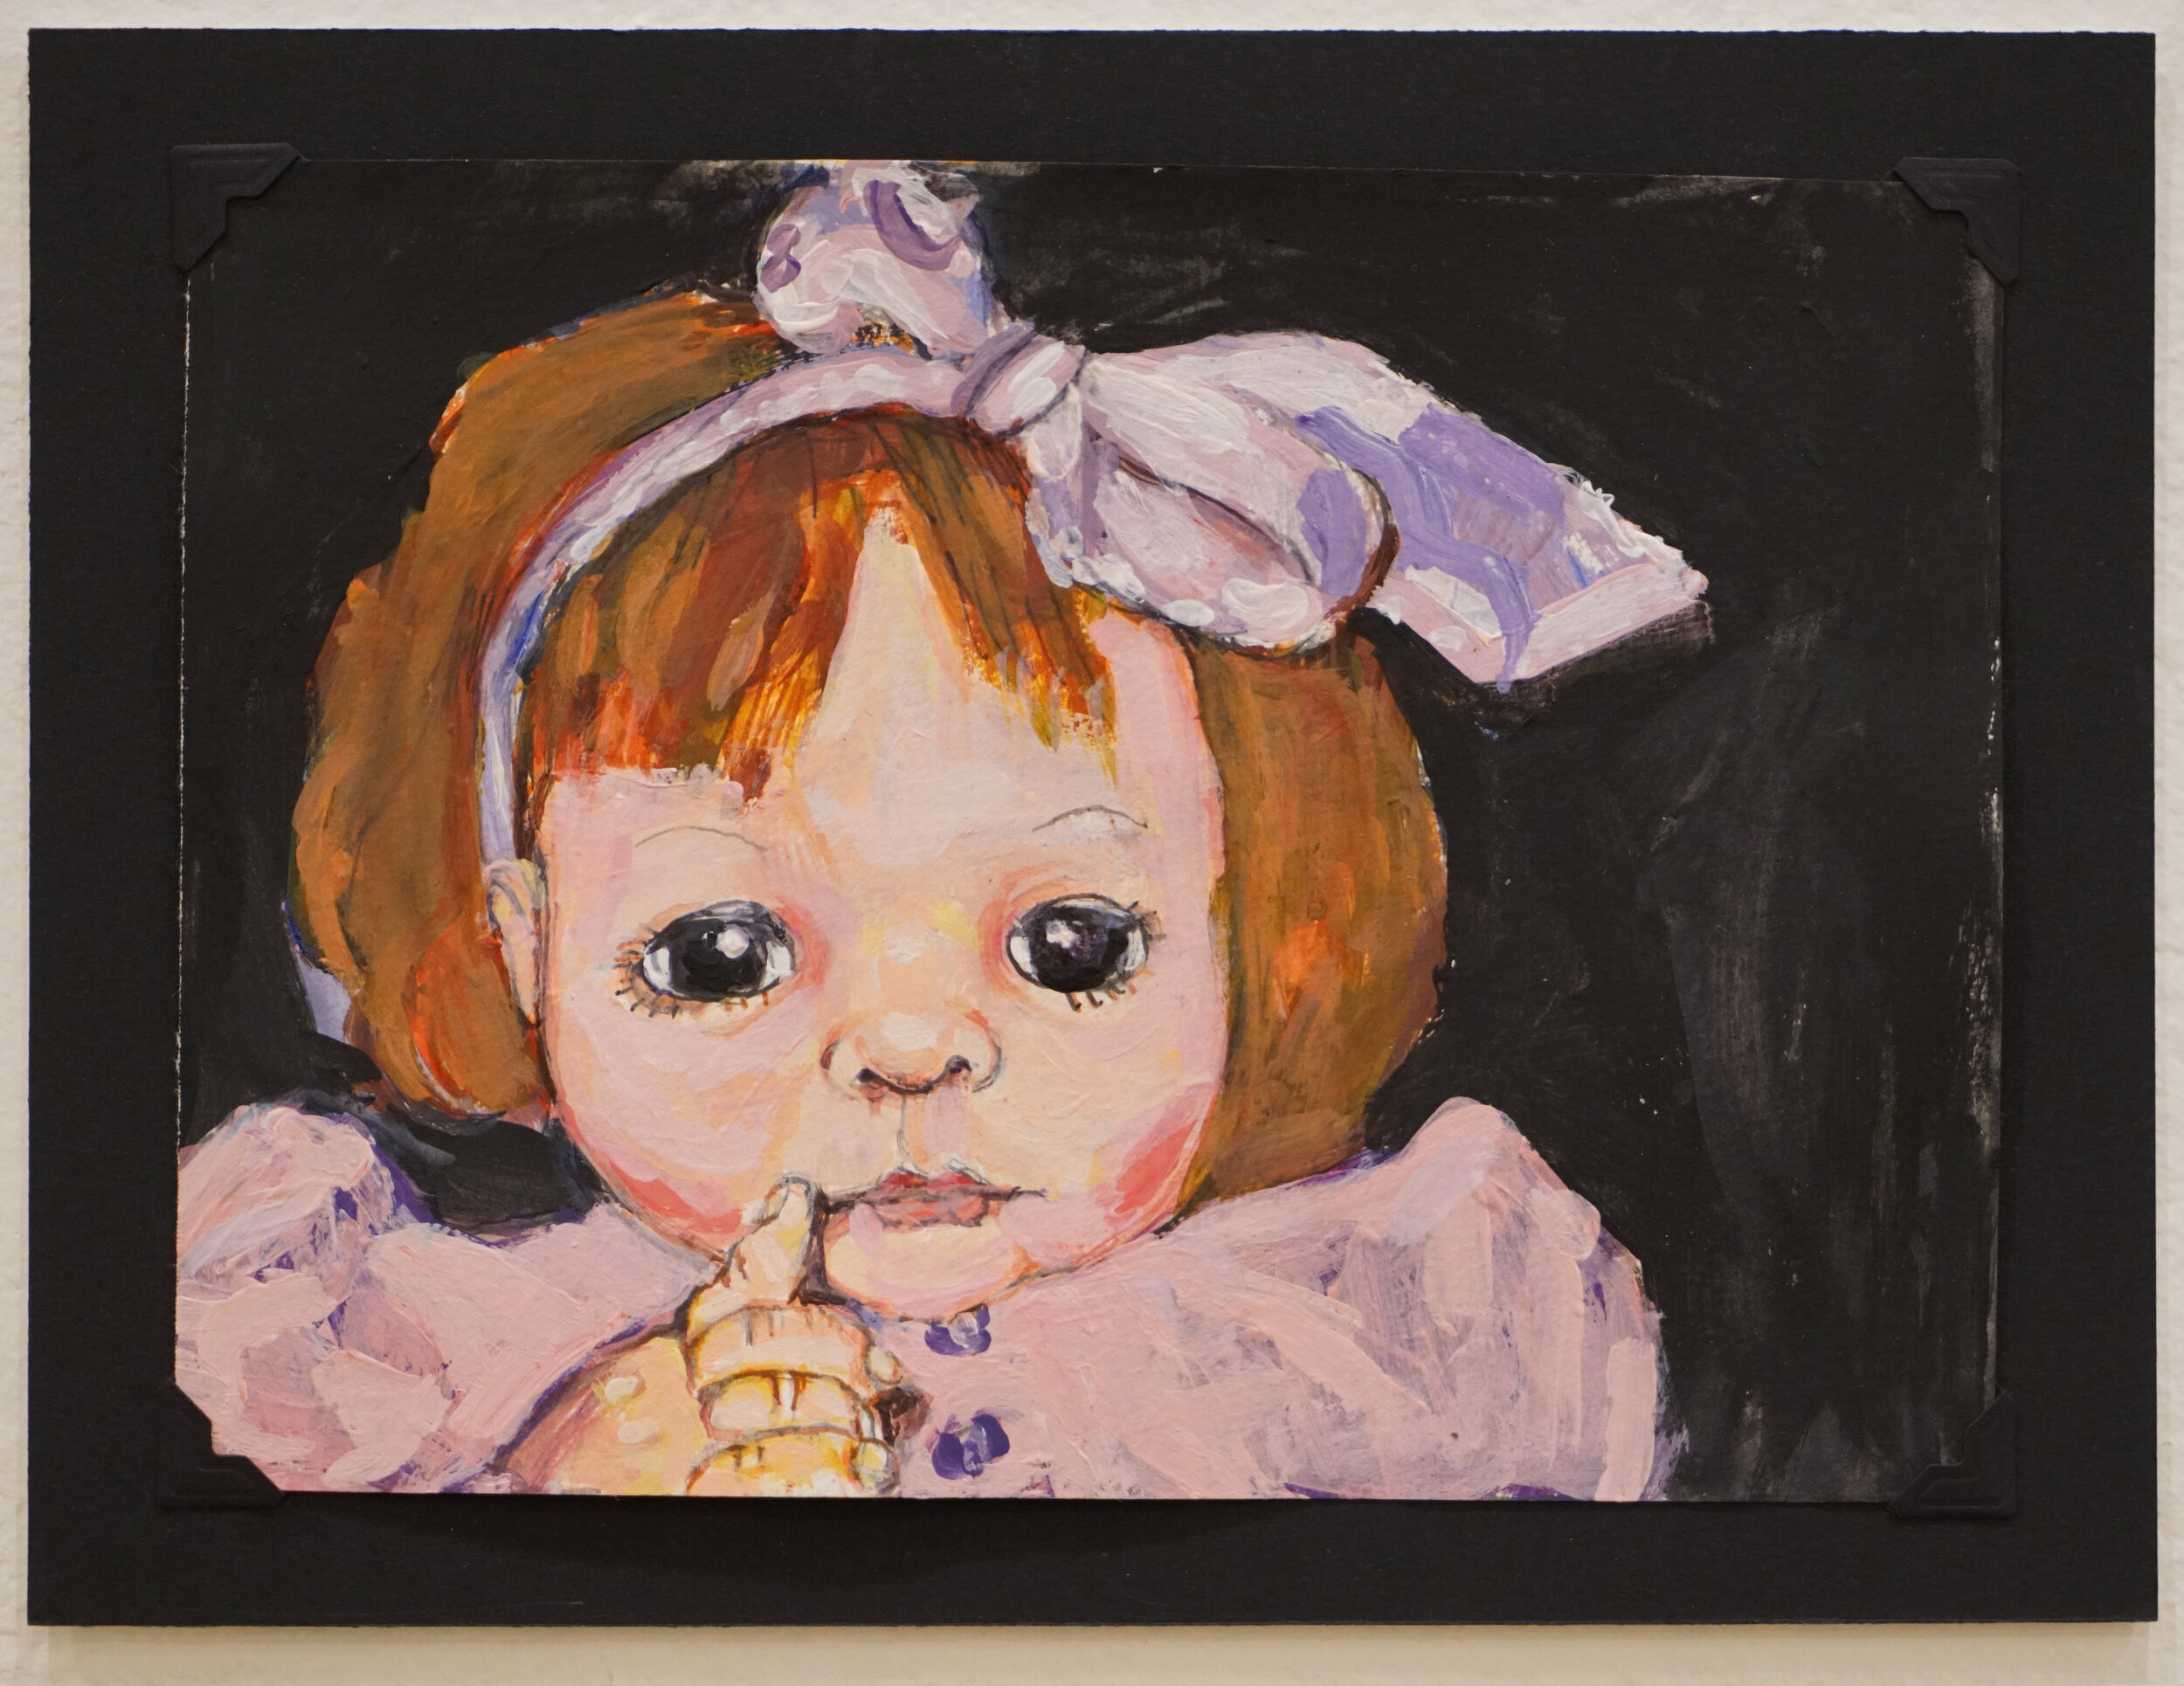  Elizabeth Wood (PiV ‘87),  Baby Doll with bow , 2018. Acrylic on paper, 8.5 x 5.5 in. 